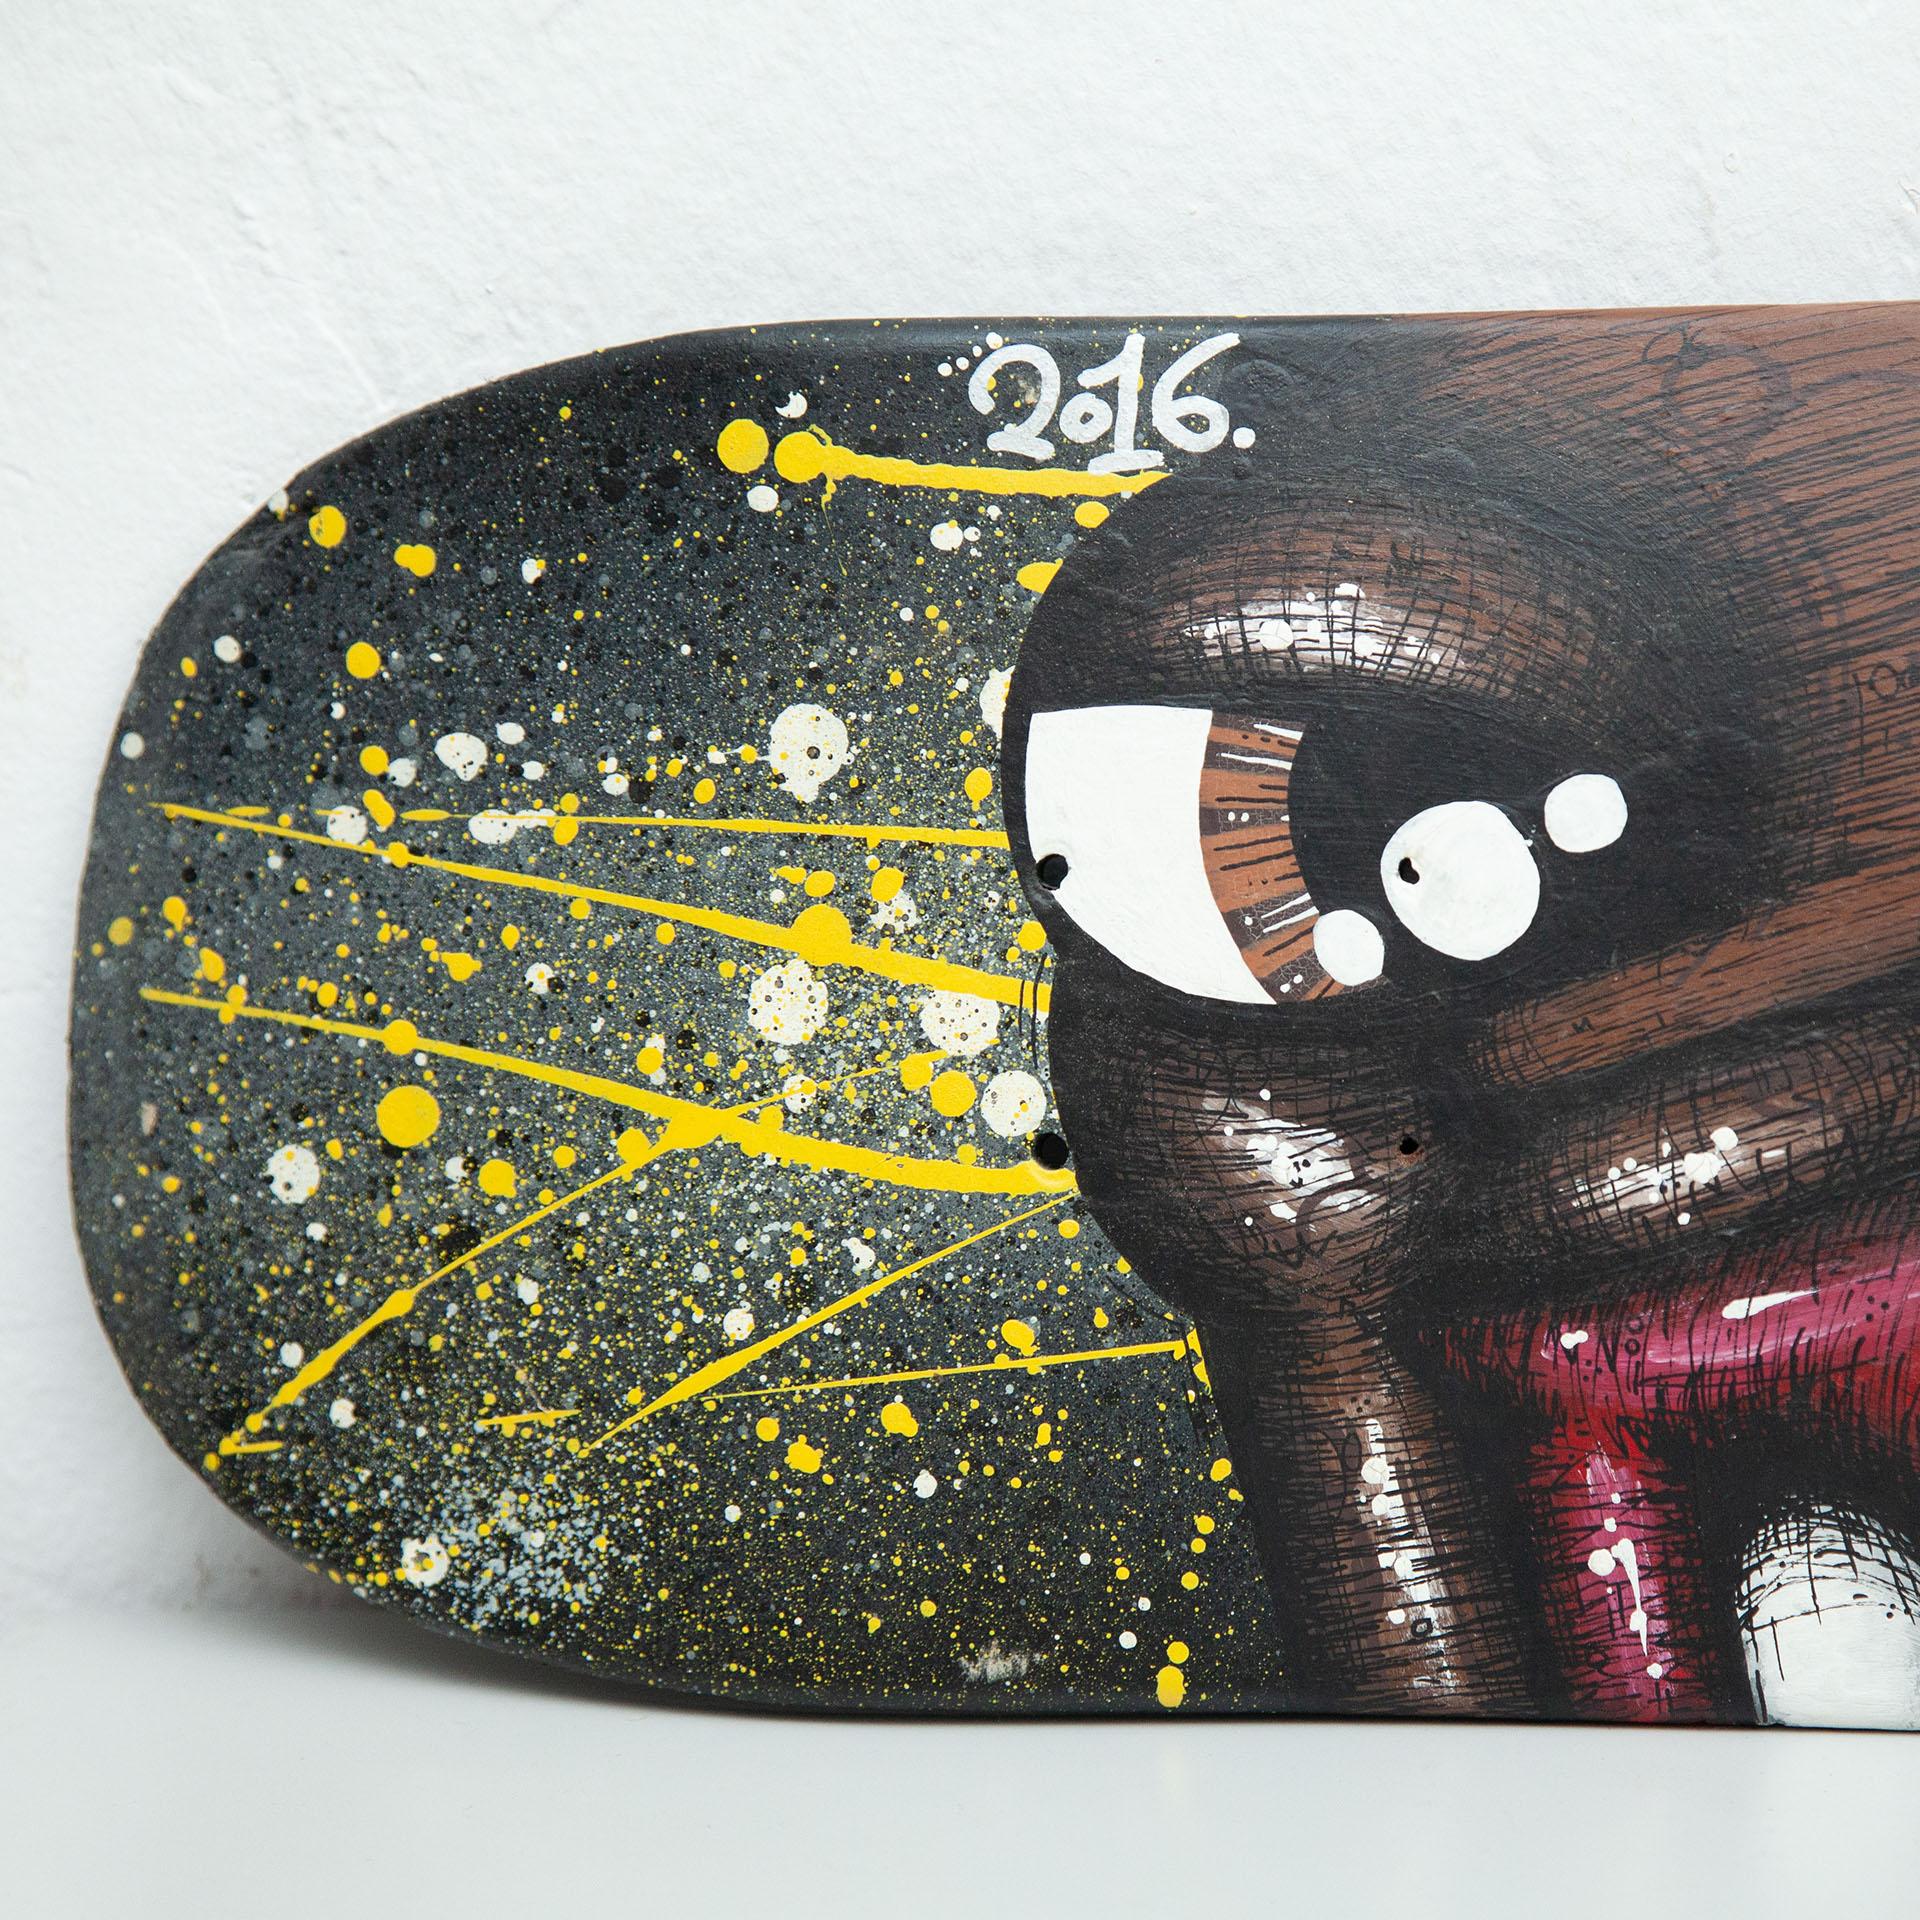 Late 20th Century Vintage Hand Painted Skateboard, circa 1989 